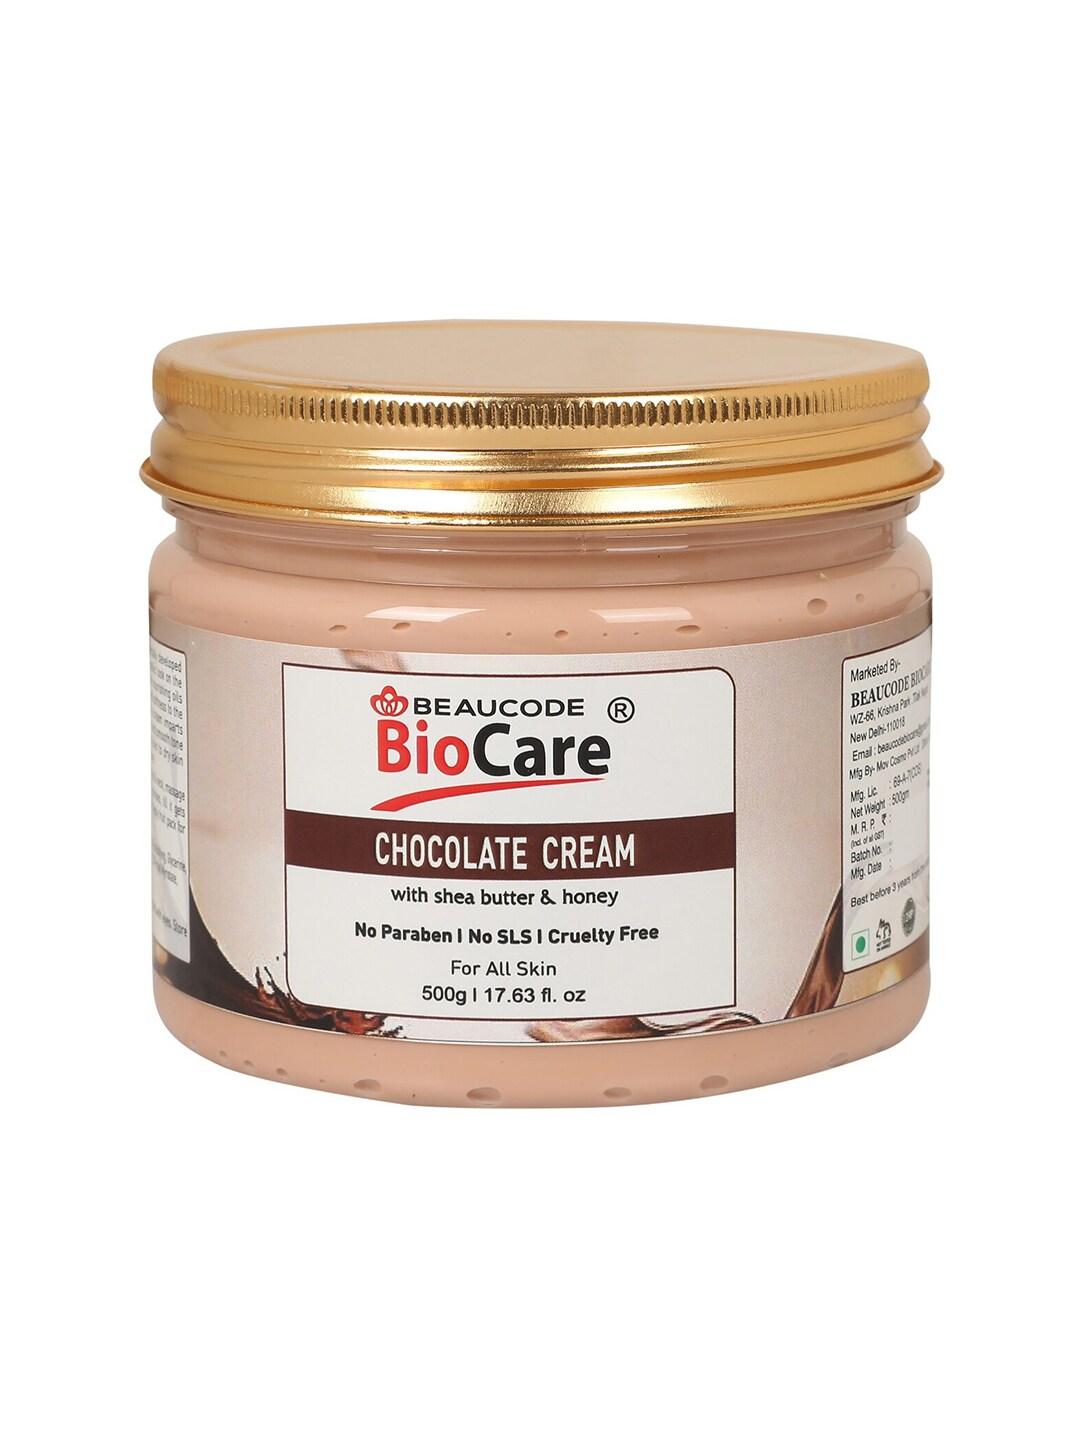 BEAUCODE BIOCARE Chocolate Face & Body Cream with Shea Butter & Honey - 500g